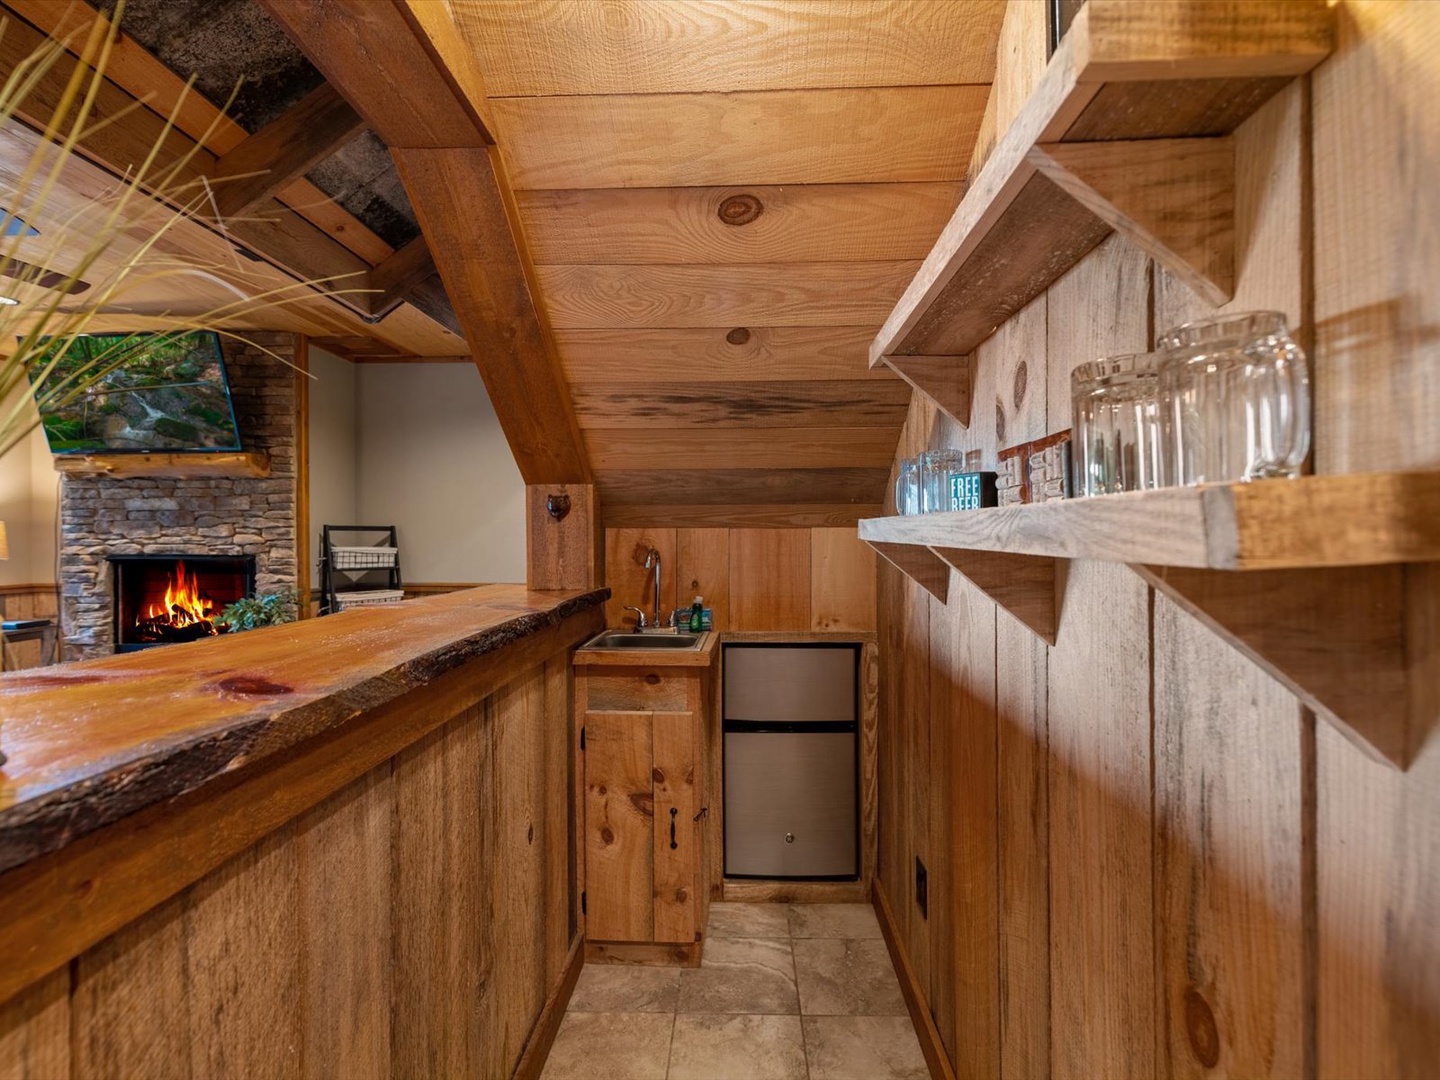 Crow's Nest- In the lower level wet bar